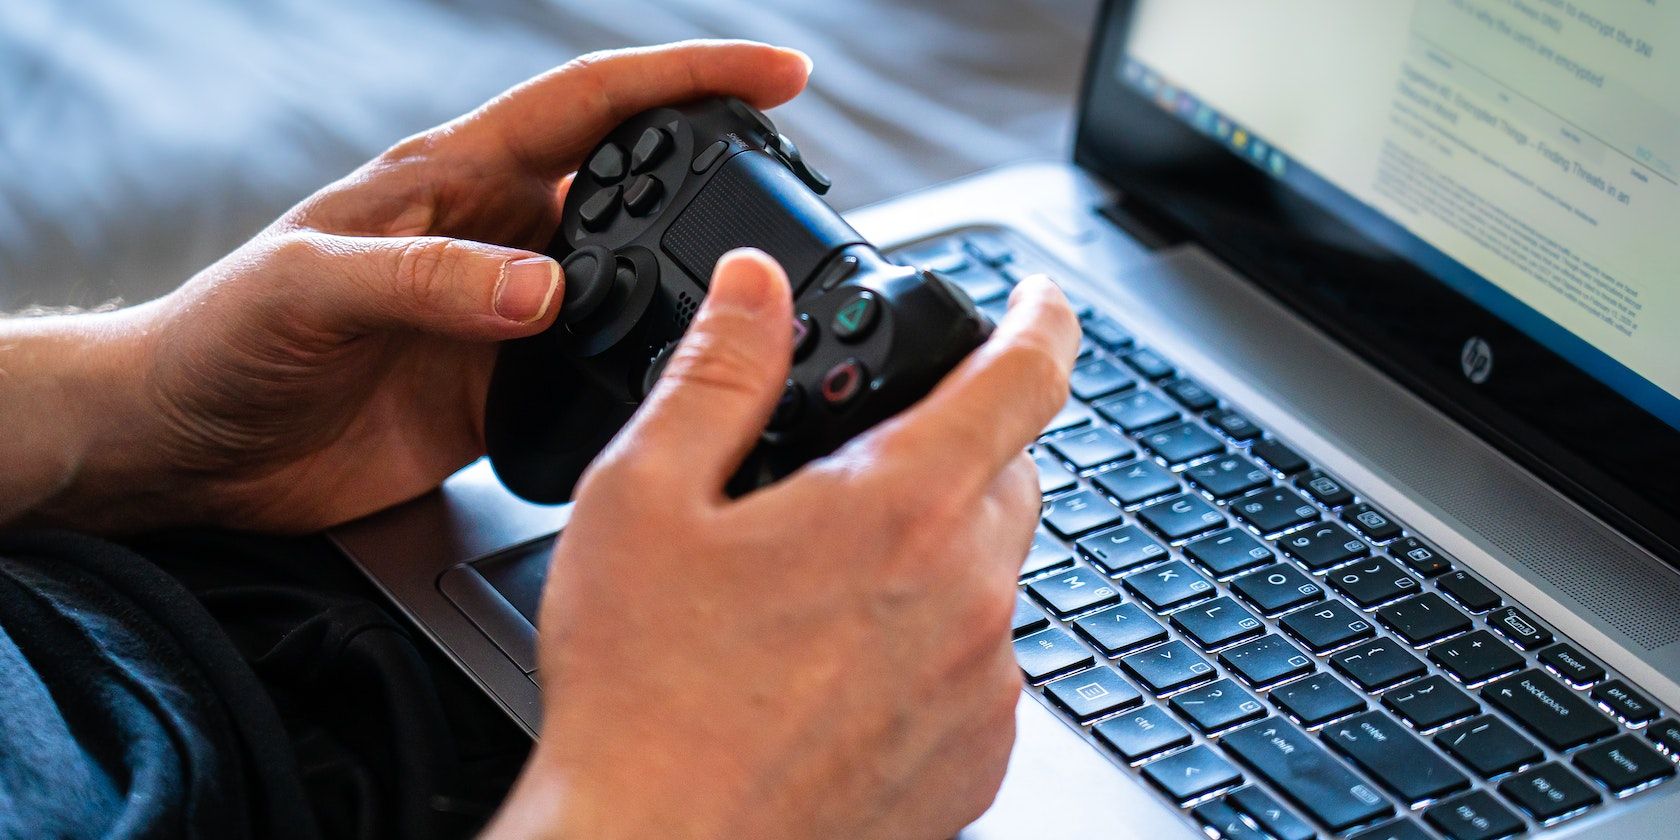 A black controller held in front of a laptop